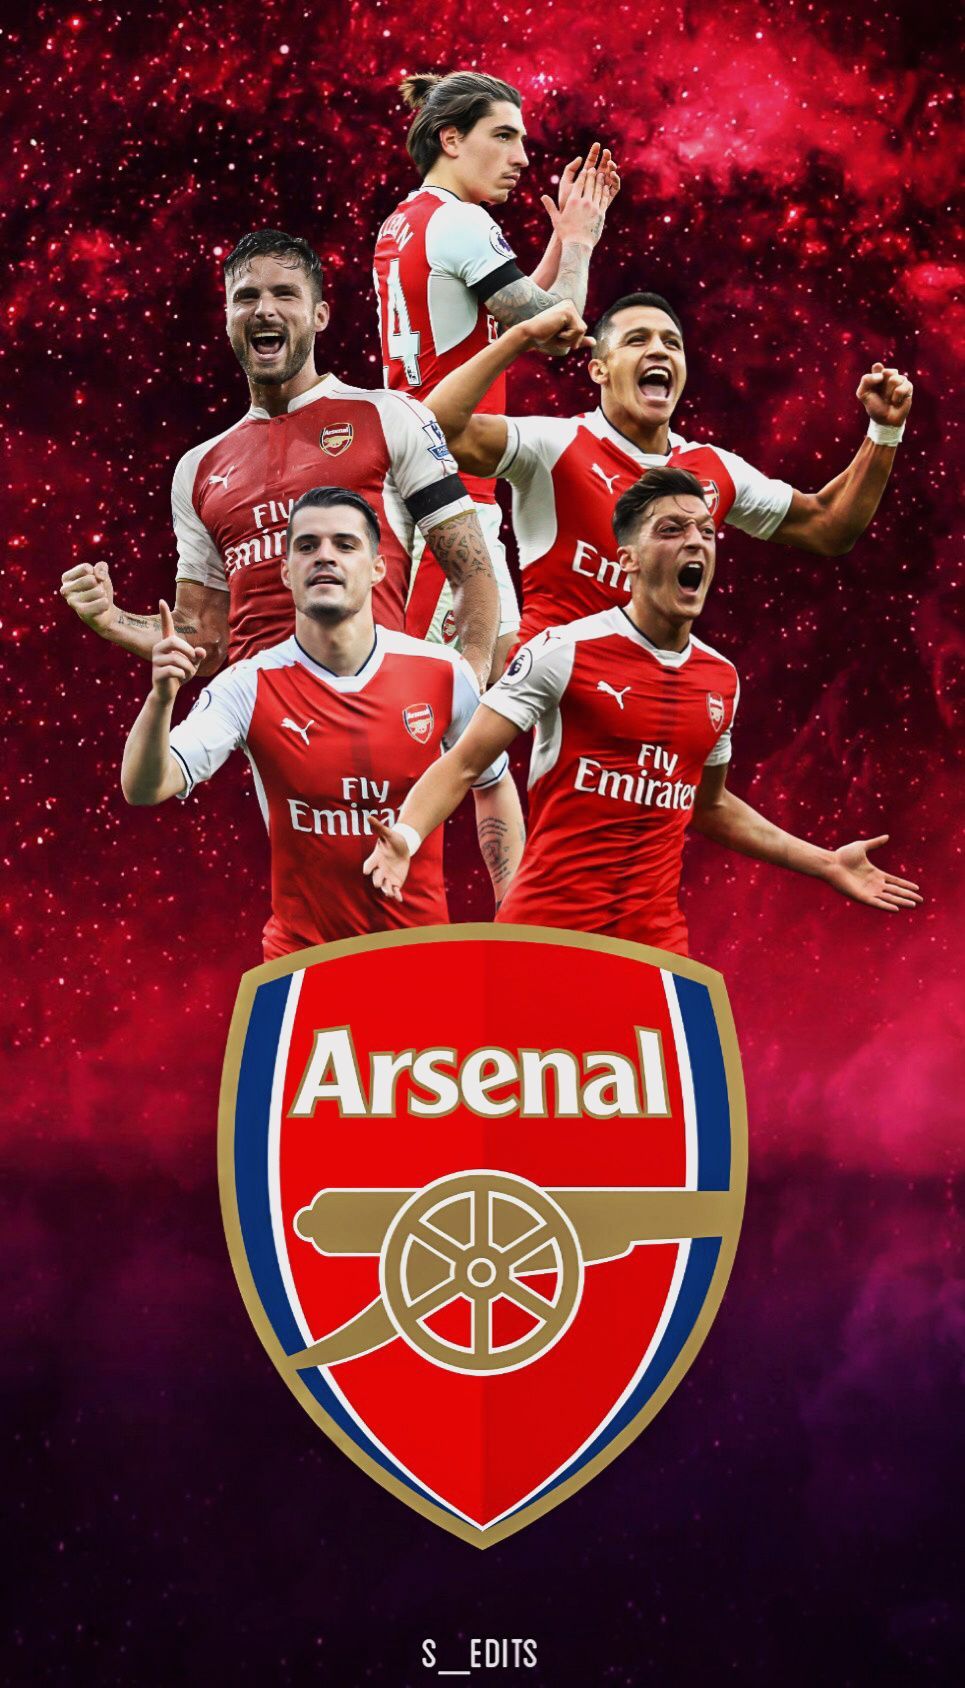 723 Arsenal Wallpaper Hd For Android Phone free Download MyWeb